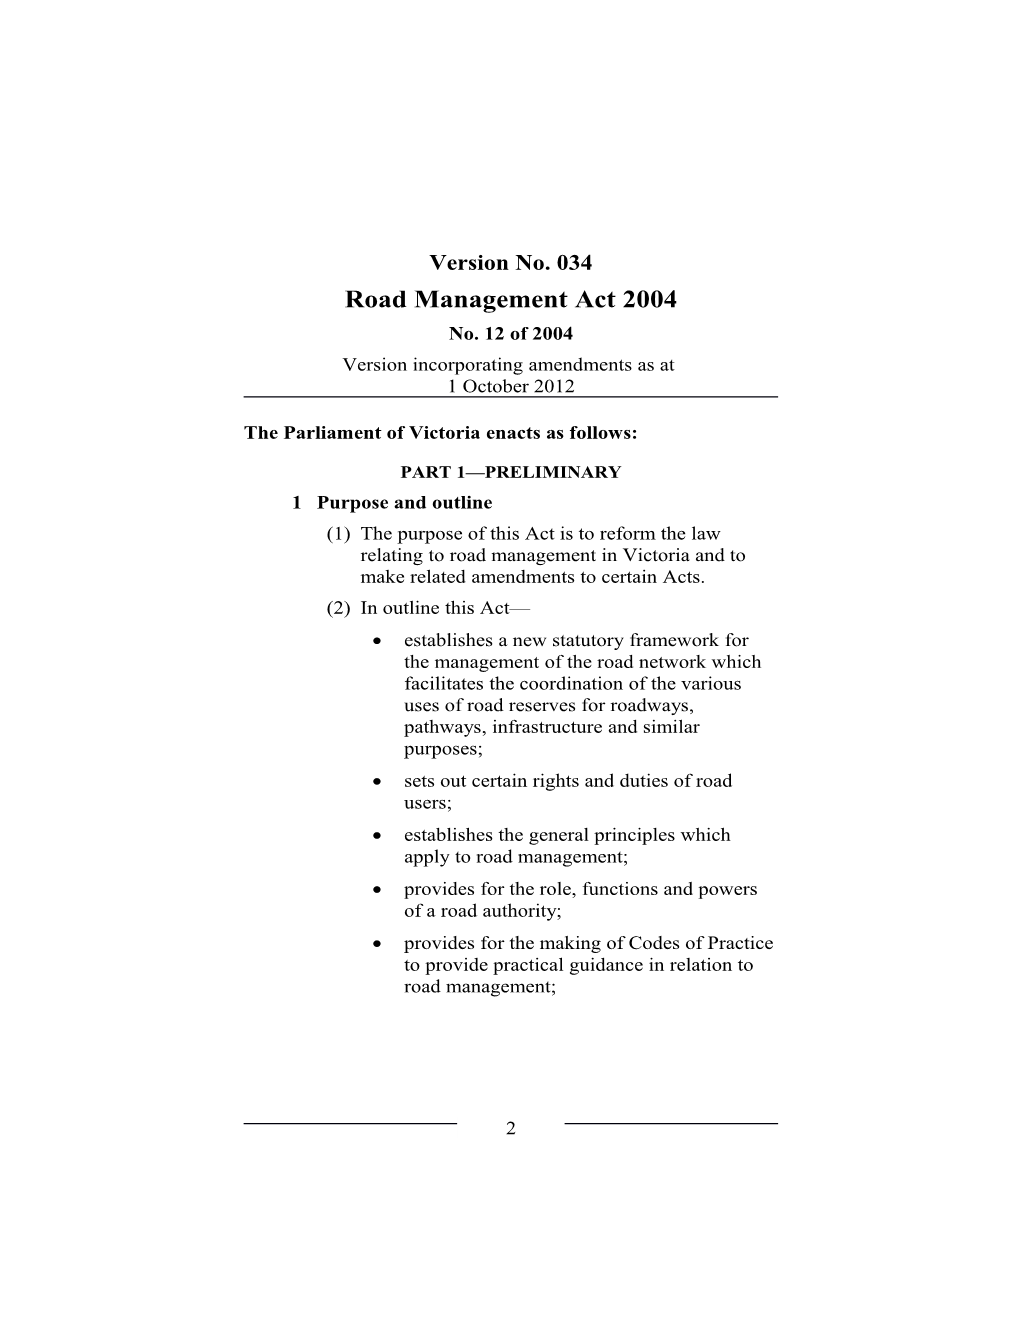 Road Management Act 2004